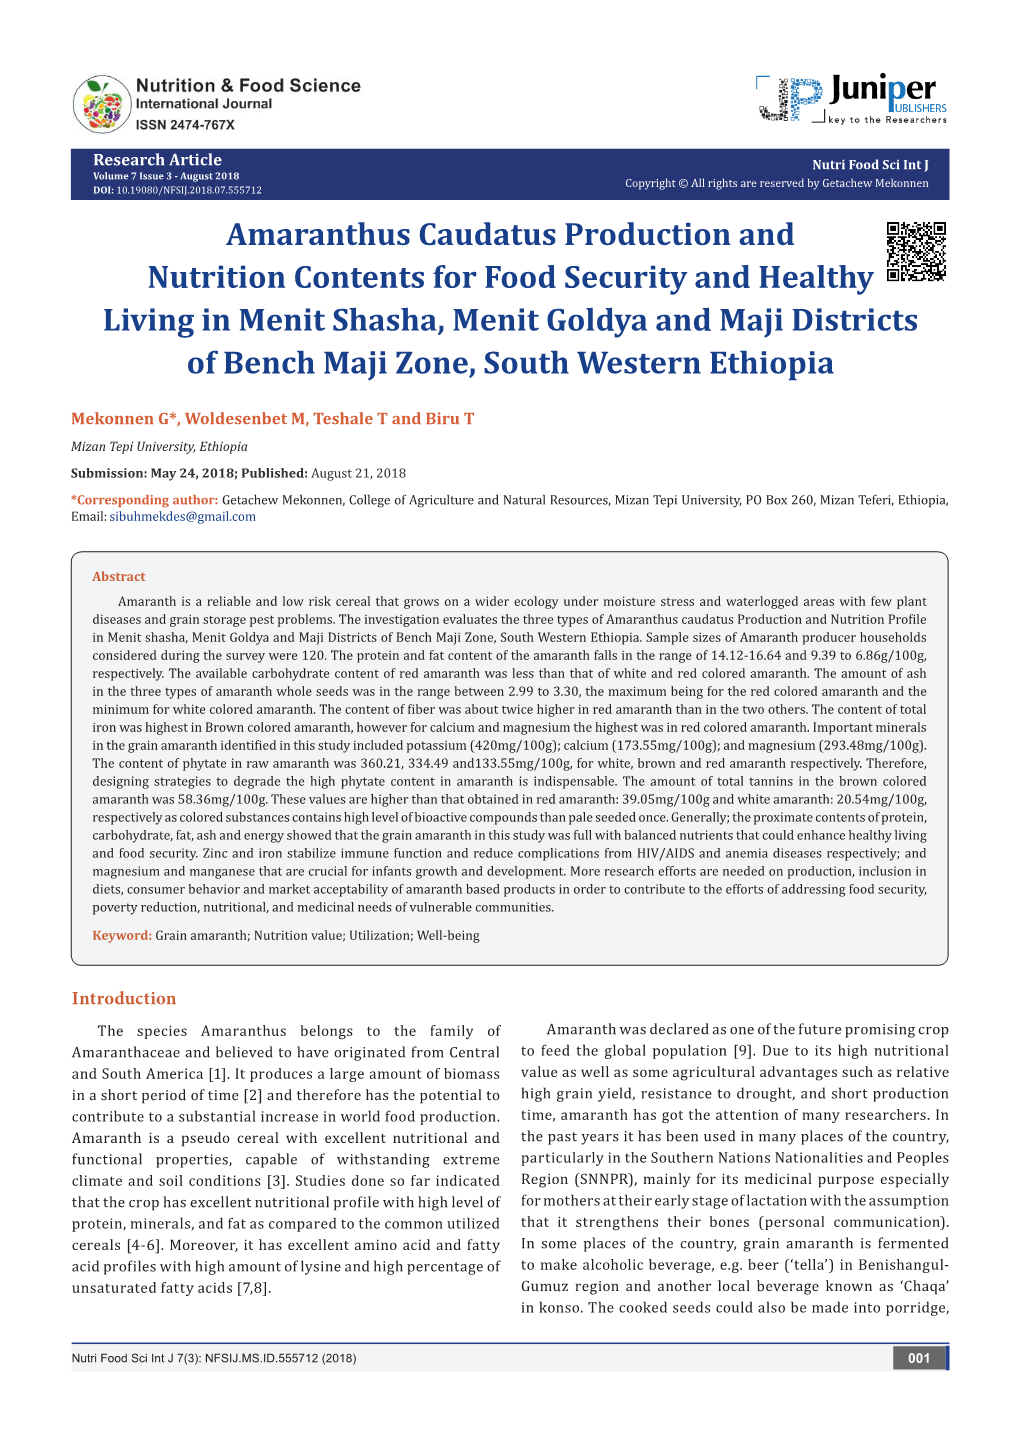 Amaranthus Caudatus Production and Nutrition Contents for Food Security and Healthy Living in Menit Shasha, Menit Goldya And